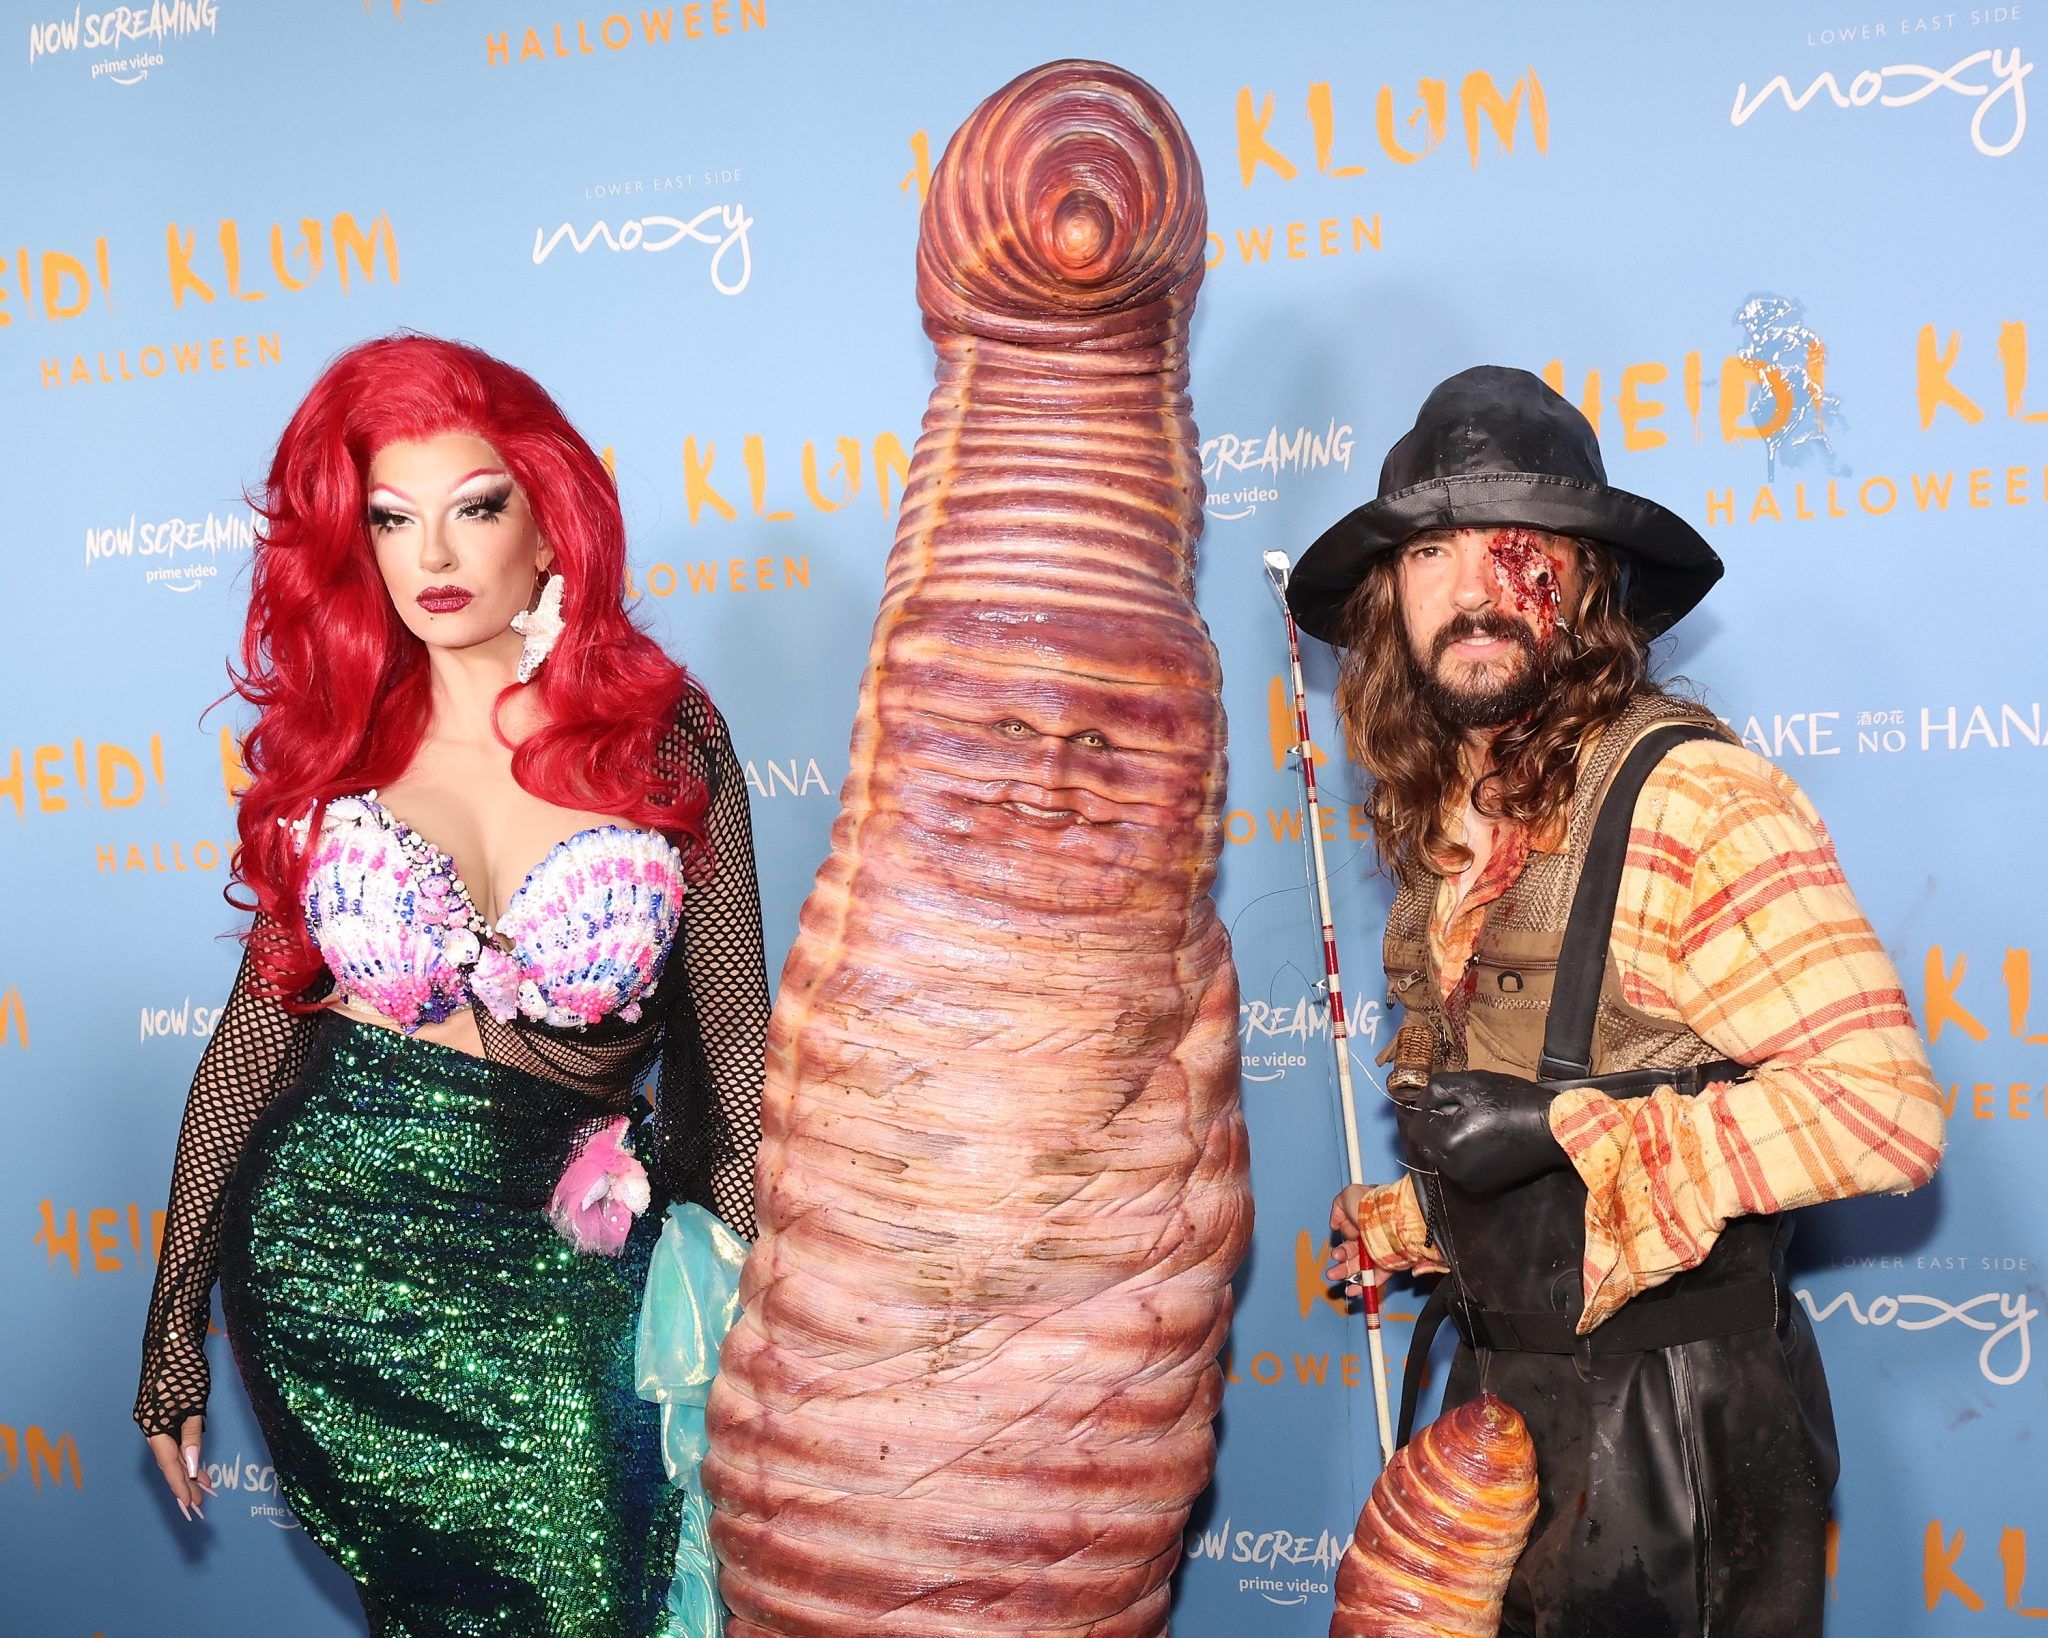 Bill Kaulitz, Heidi Klum, and Tom Kaulitz attend Heidi Klum's 2022 Hallowe'en Party at Cathedrale at Moxy Hotel on October 31, 2022 in New York City. (Photo by Taylor Hill/Getty Images)